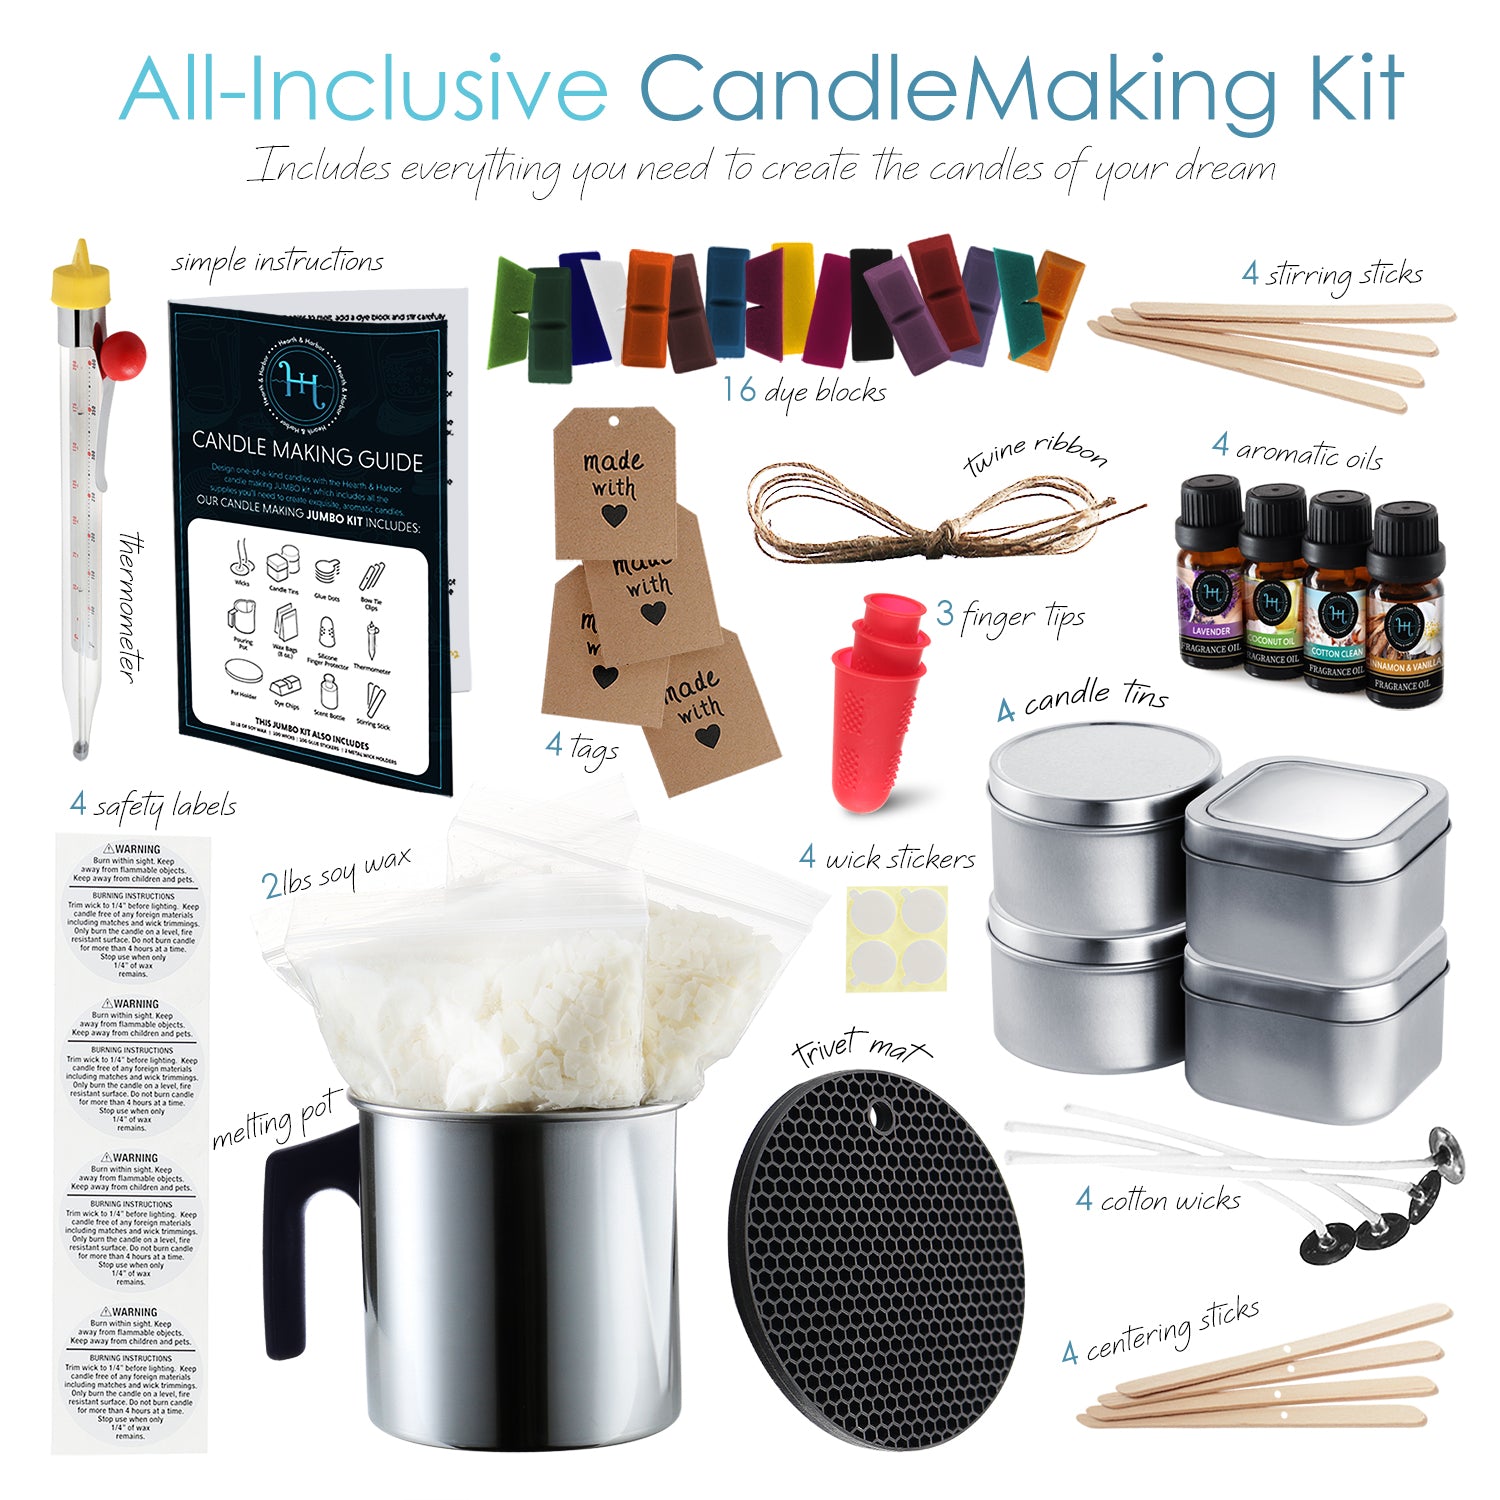 Cotton Candle Making Supplies, Candle Wicks Candle Making